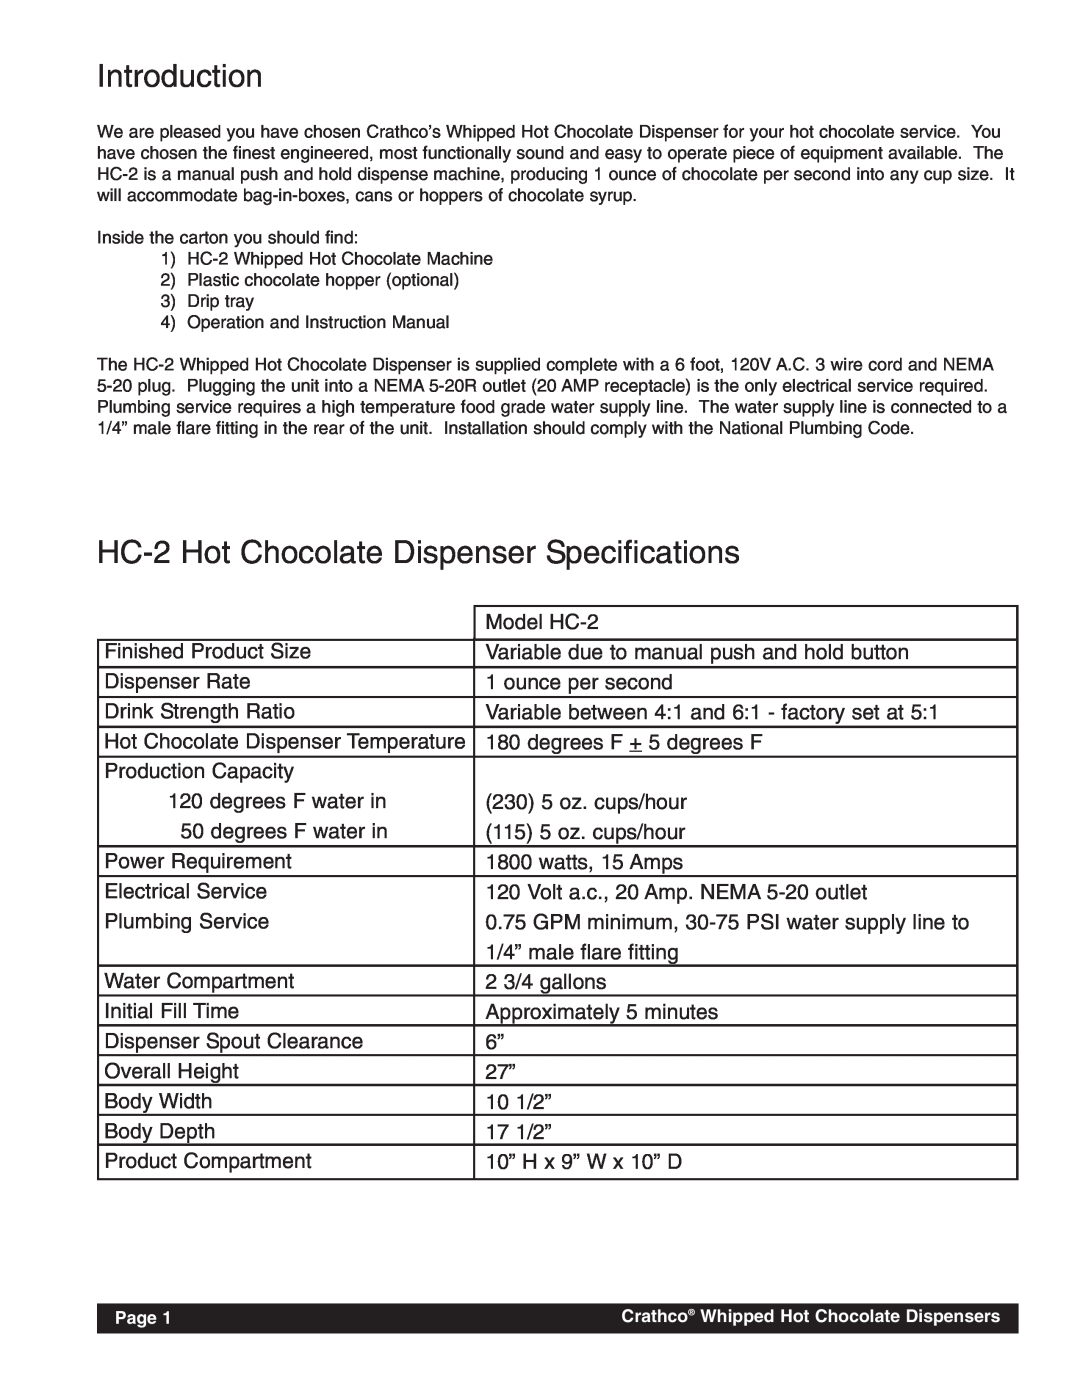 Grindmaster instruction manual Introduction, HC-2Hot Chocolate Dispenser Specifications 